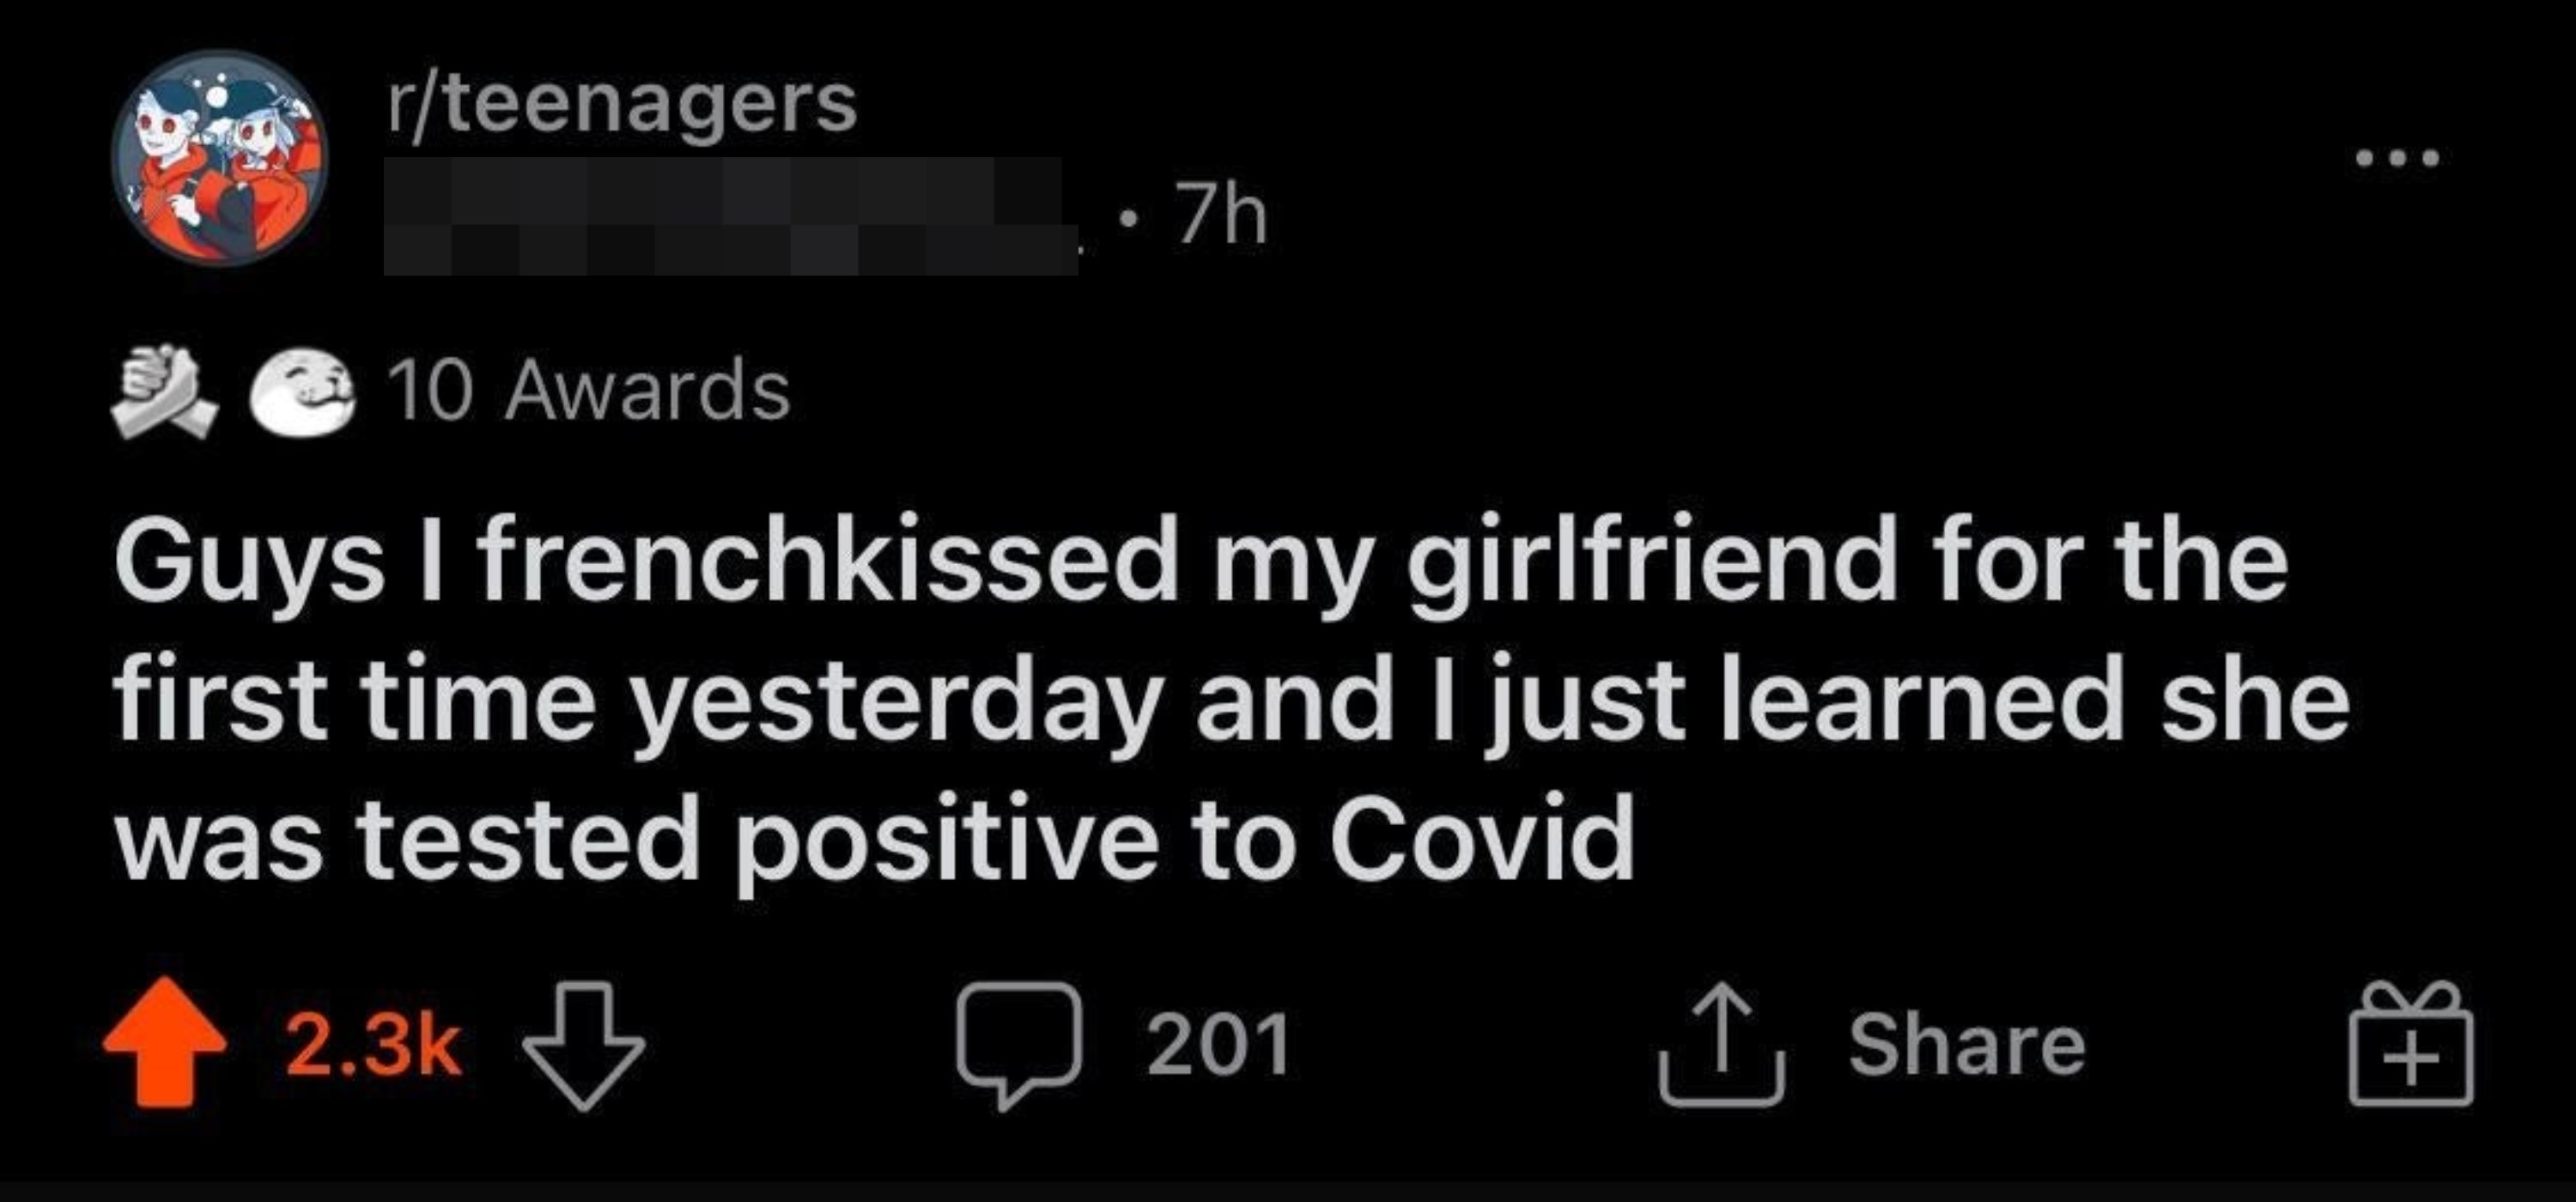 Reddit post where someone said they kissed their girlfriend who then tested positive for COVID